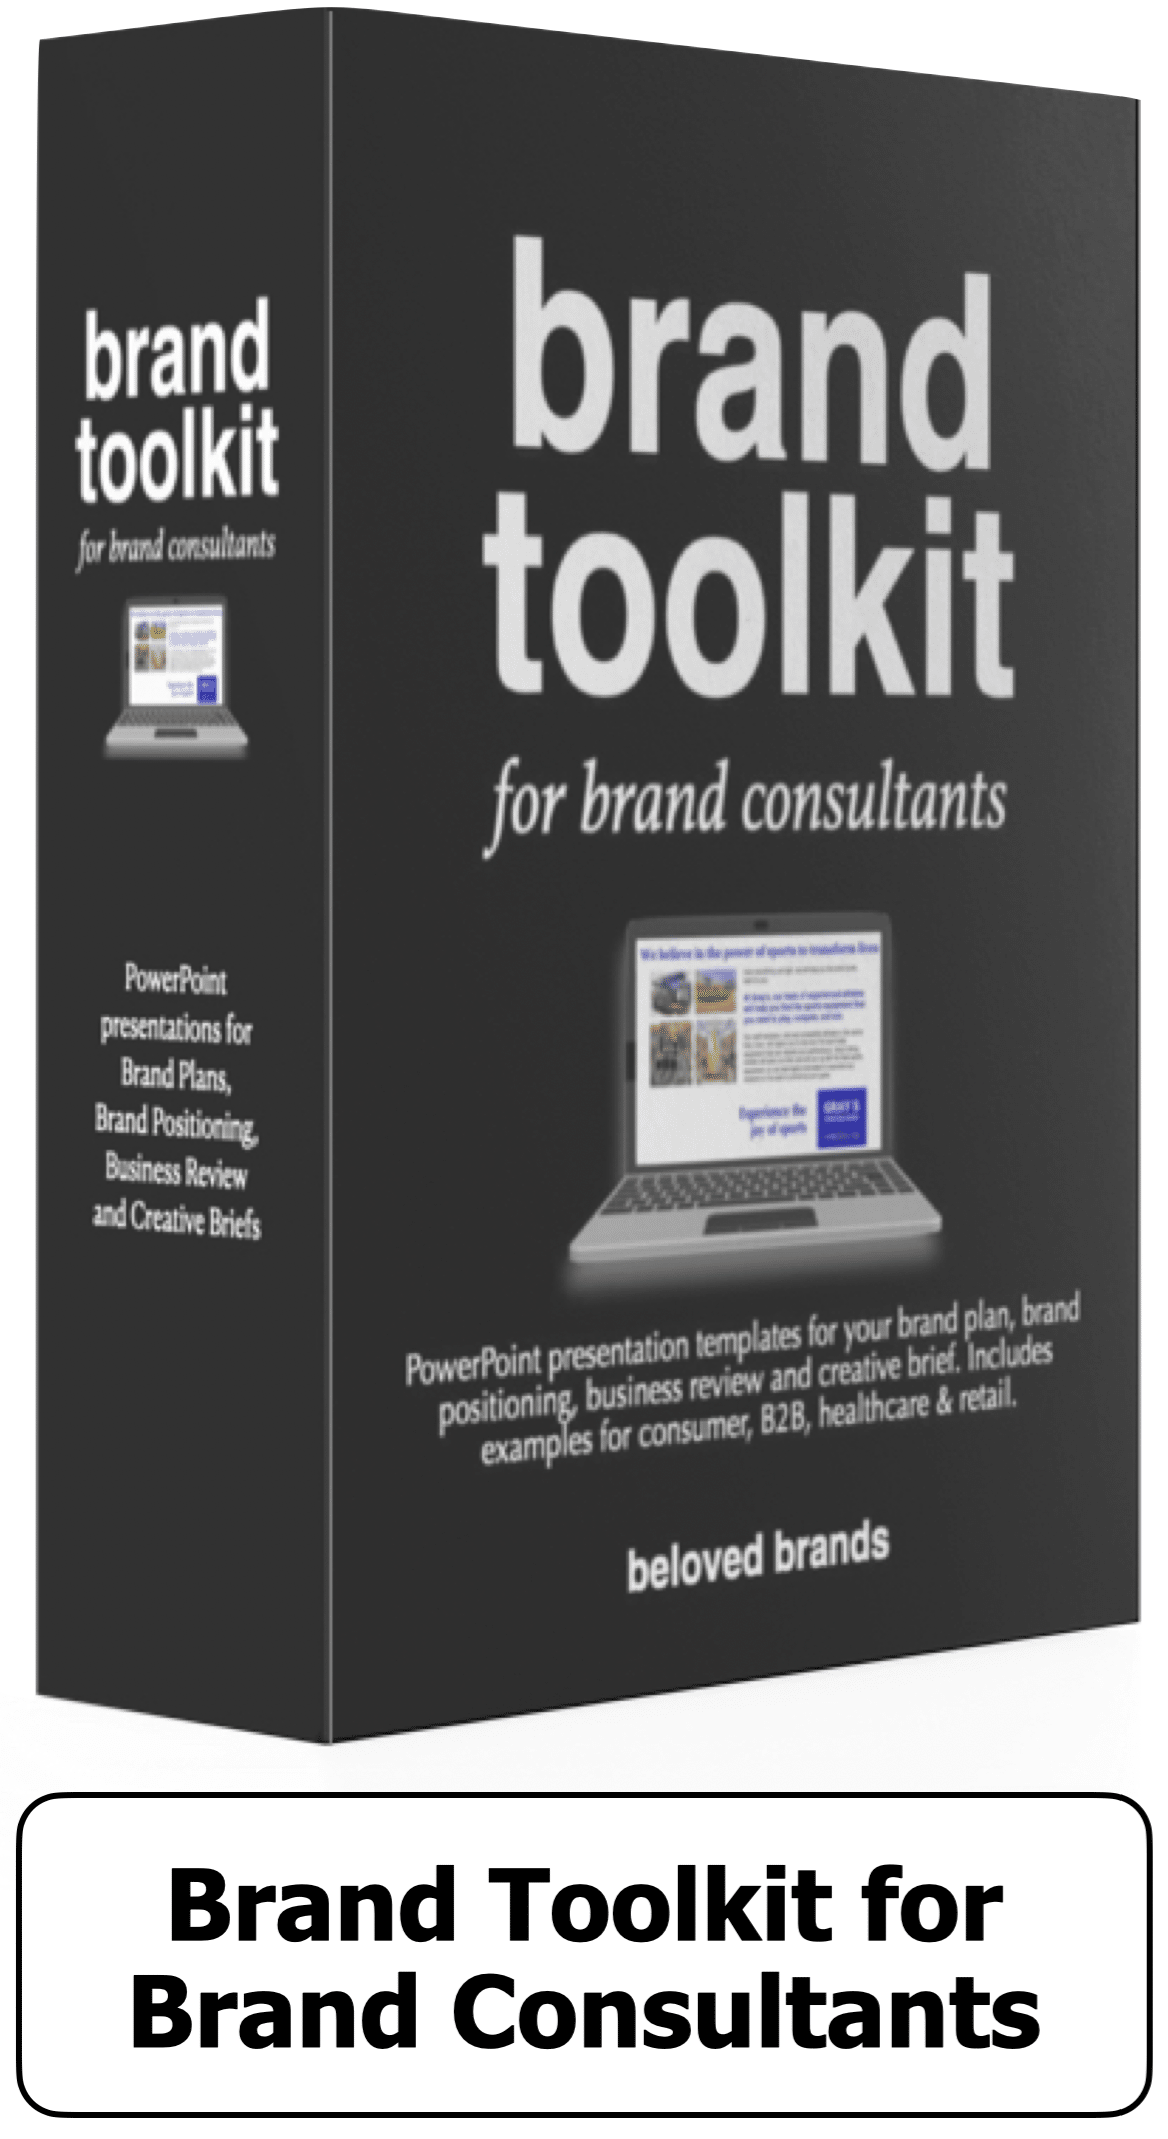 Brand Toolkit for Brand Consultants